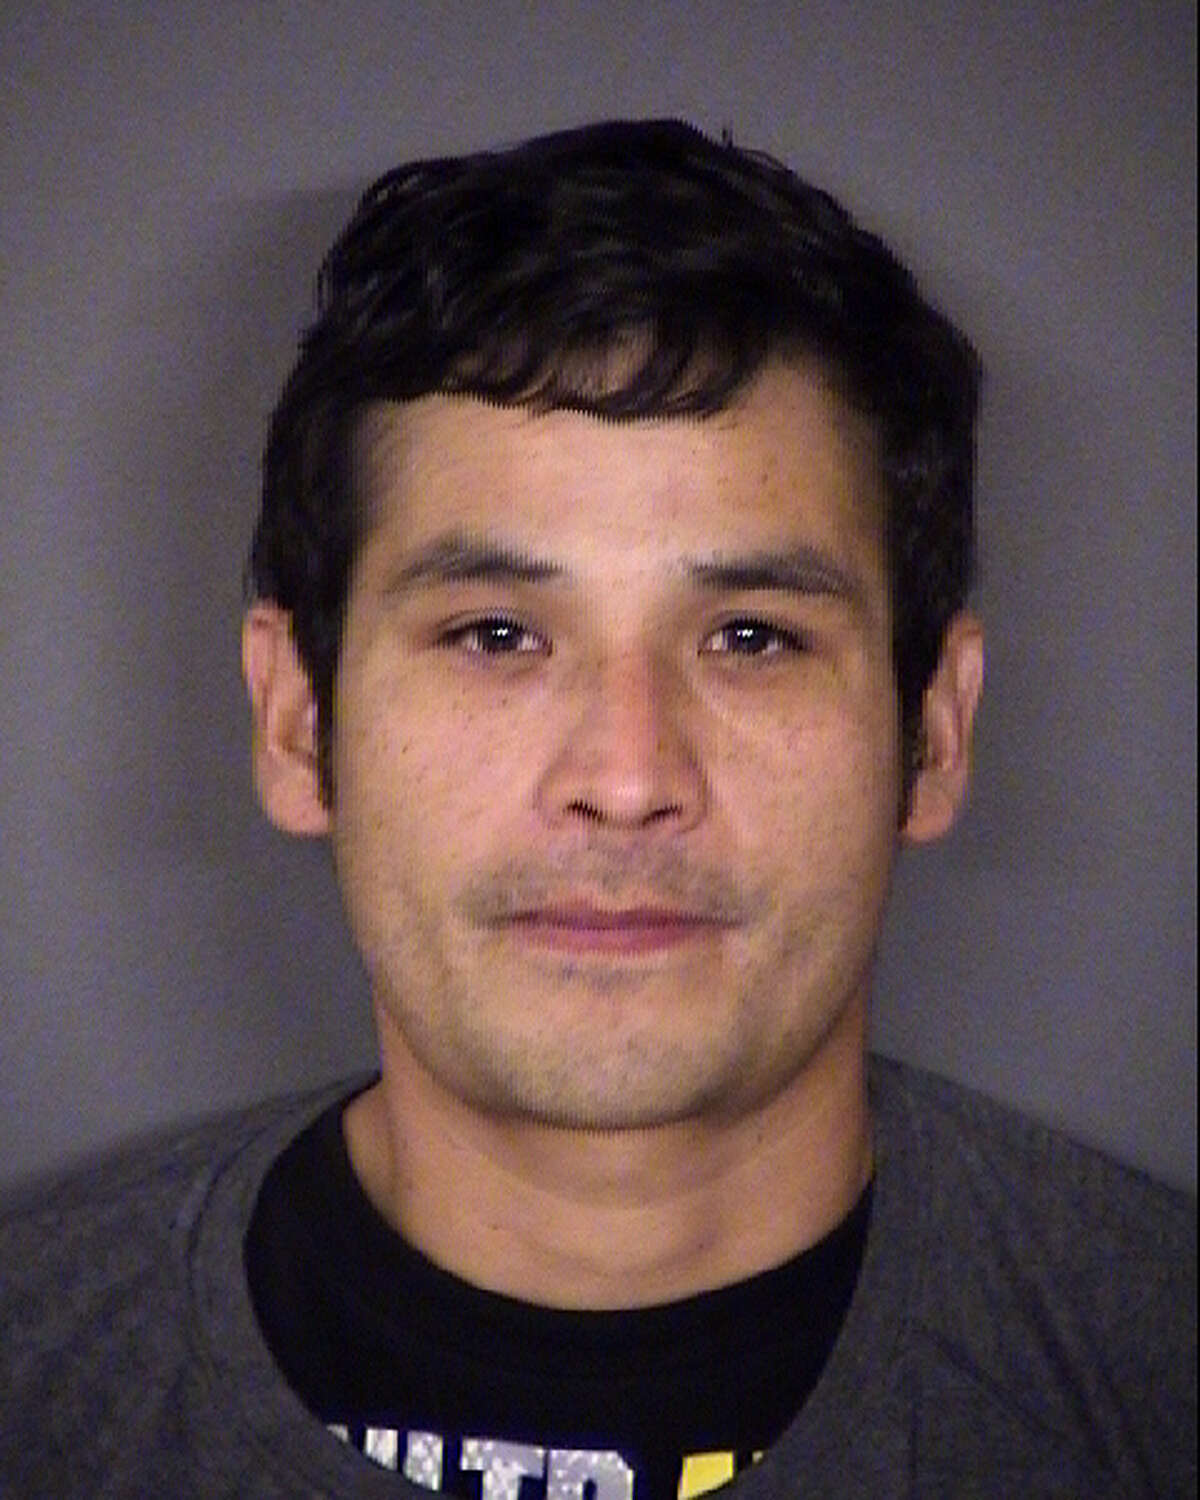 Angel Gonzalez was arrested on May 10, according to online Bexar County court records. He faces one charge of theft.